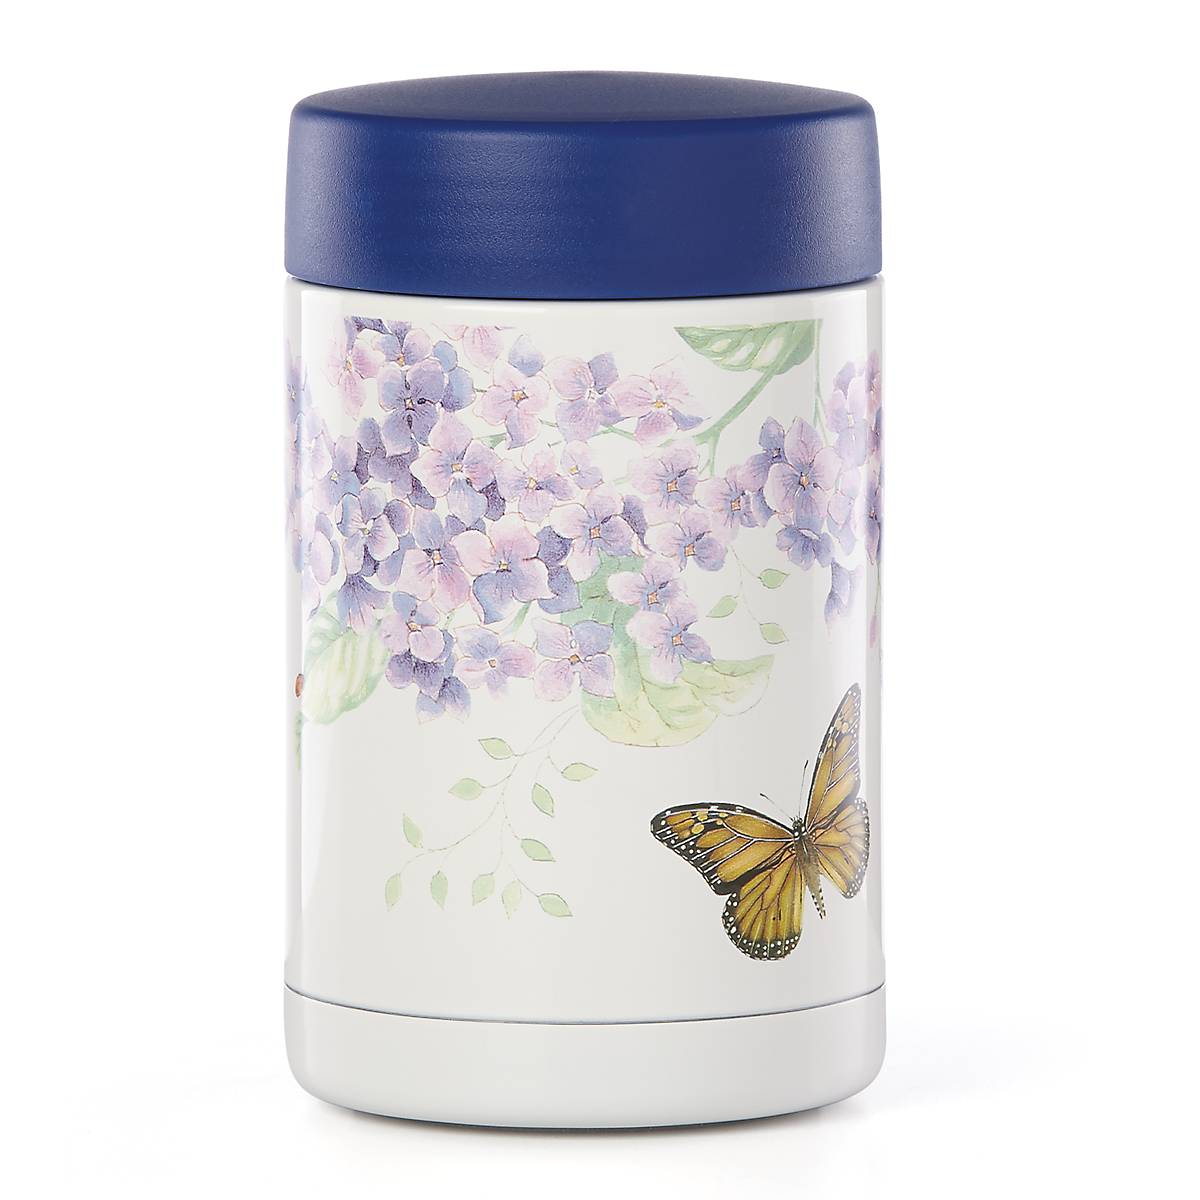 Lenox Butterfly Meadow Insulated Food Container Large